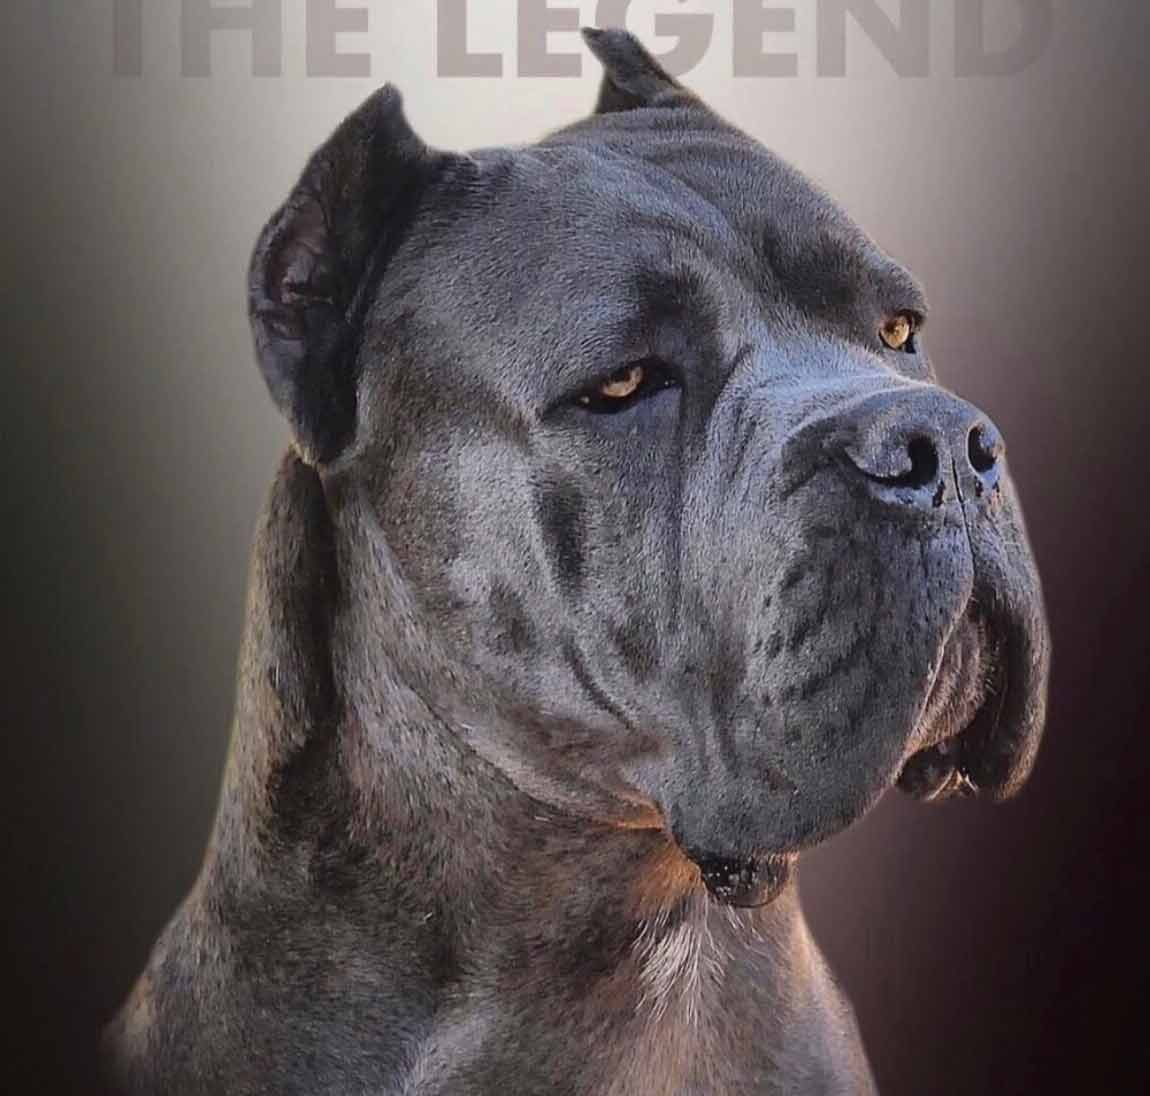 buy cane corso in Essen Germany and puppies for sale in Germany and rietcorso in essen kopen en rietcorsopuppies in essen verkopen4